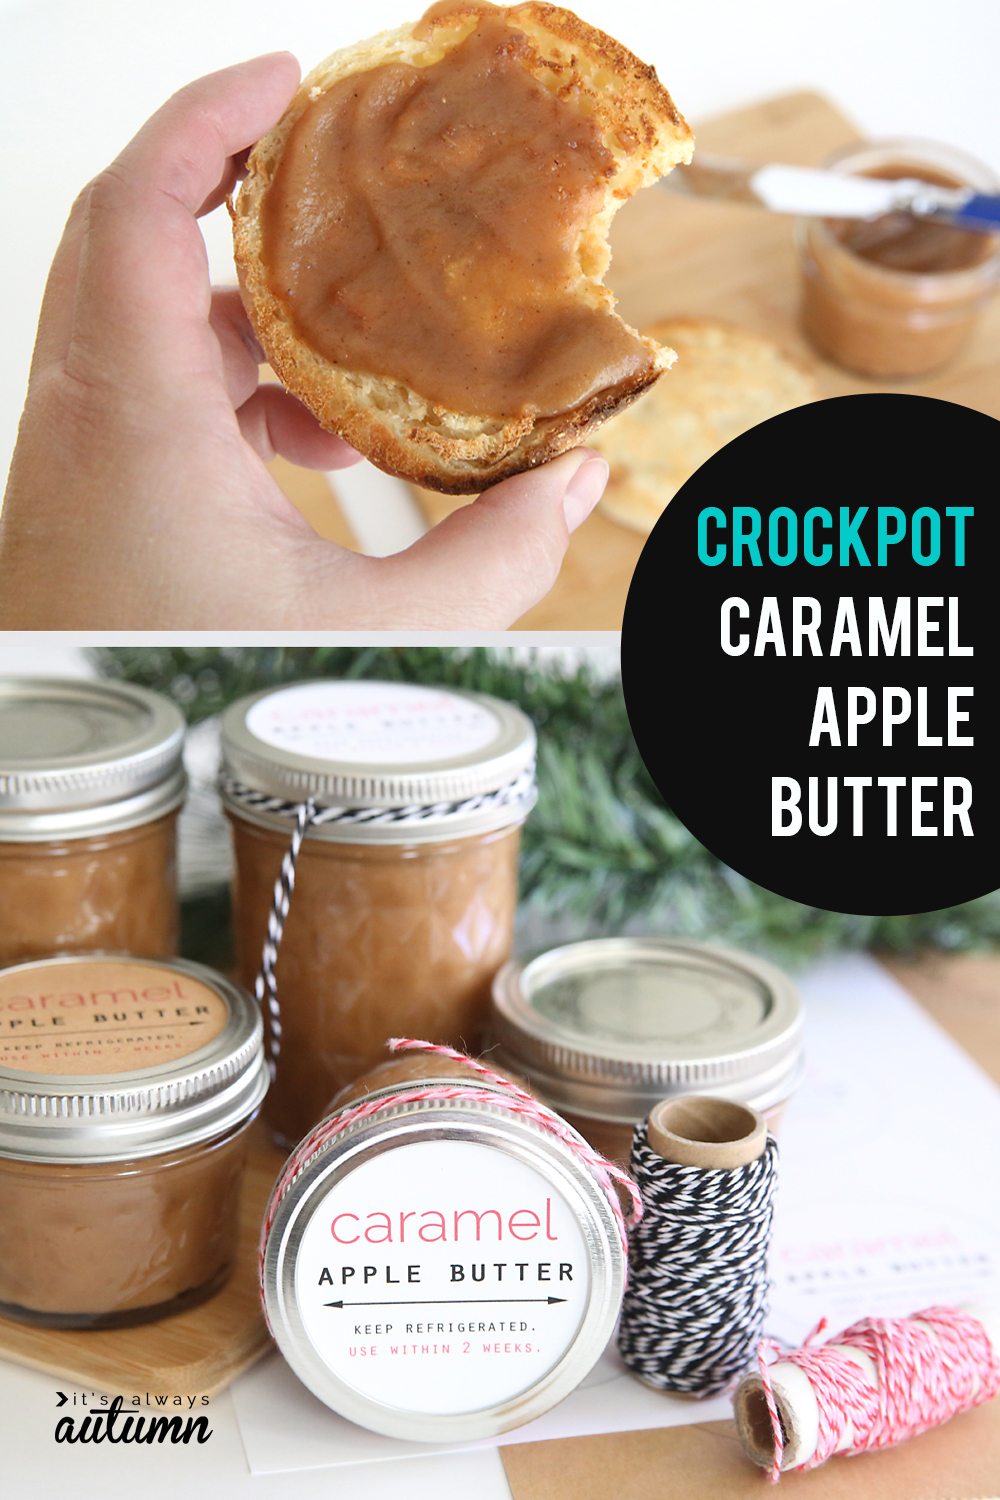 This caramel apple butter is easy to make in the crockpot and is delicious! It makes a beautiful DIY gift.